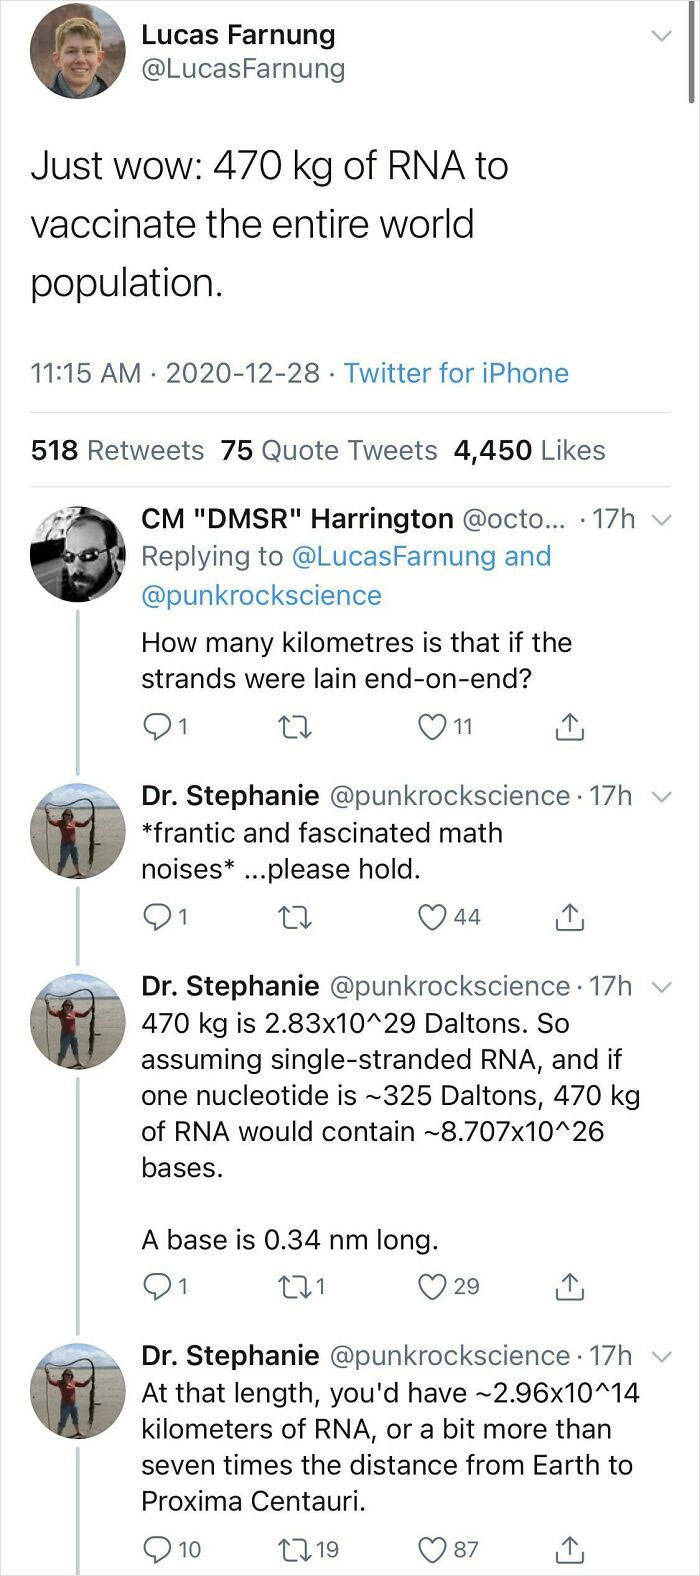 paper - Lucas Farnung Just wow 470 kg of Rna to vaccinate the entire world population. . Twitter for iPhone 518 75 Quote Tweets 4,450 Cm "Dmsr" Harrington ... 17h and How many kilometres is that if the strands were lain endonend? 21 27 11 Dr. Stephanie . 